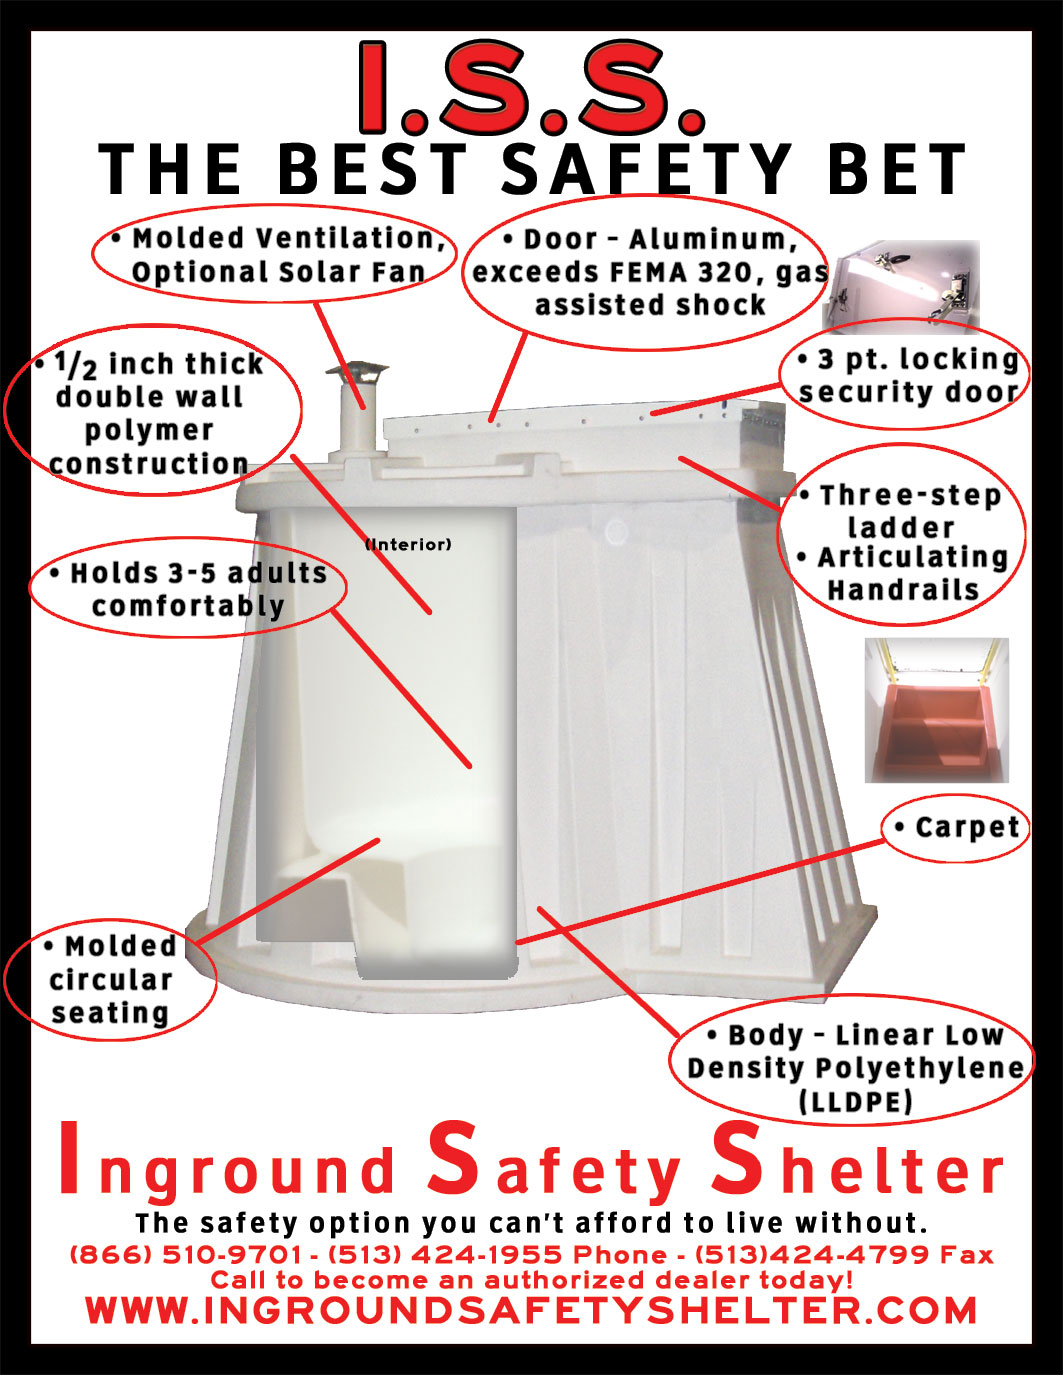 Storm Shelters, Tornado Shelters, Granger ISS, Underground Shelters